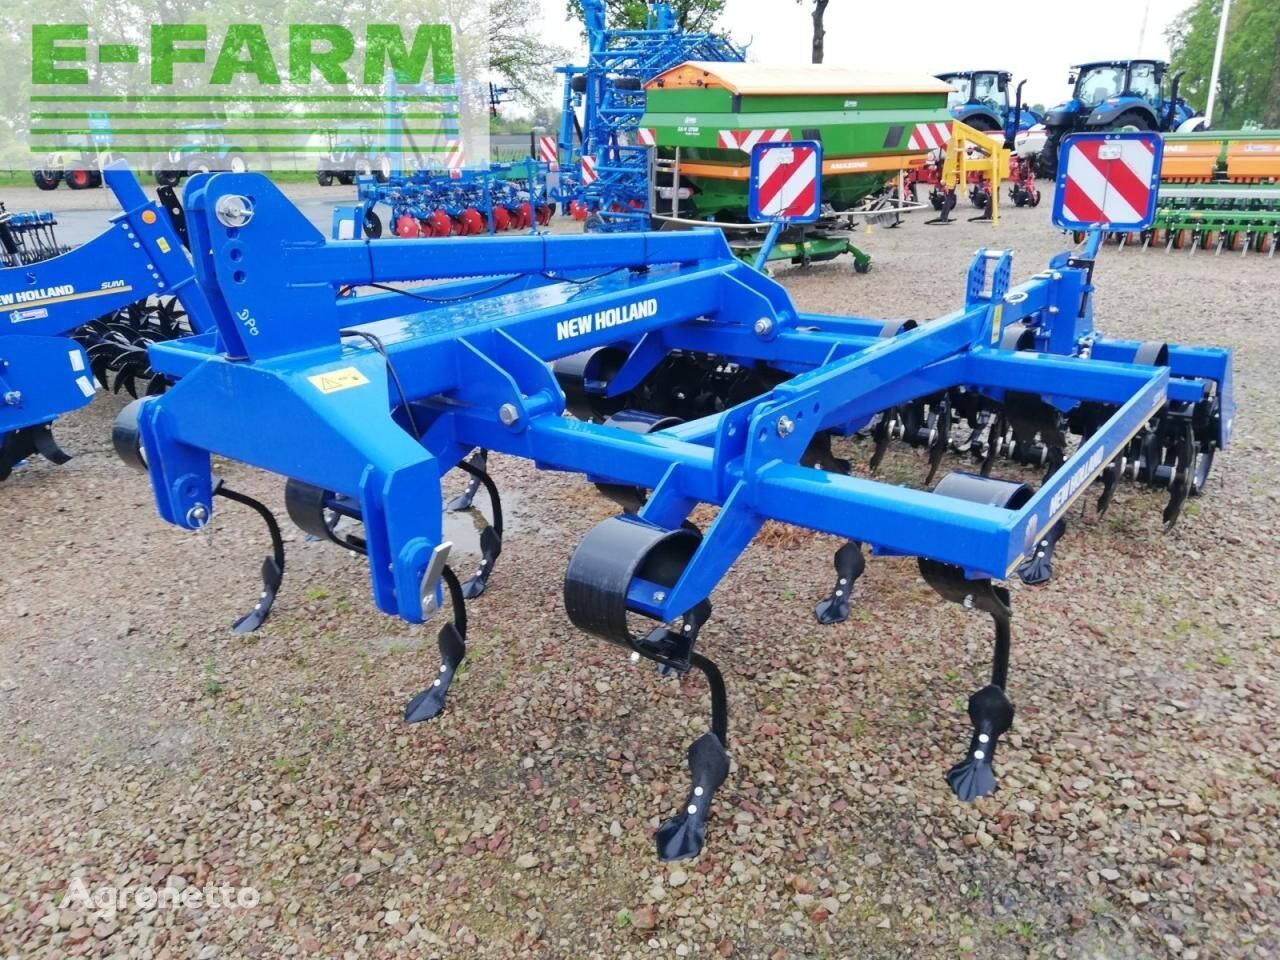 New Holland cultivator